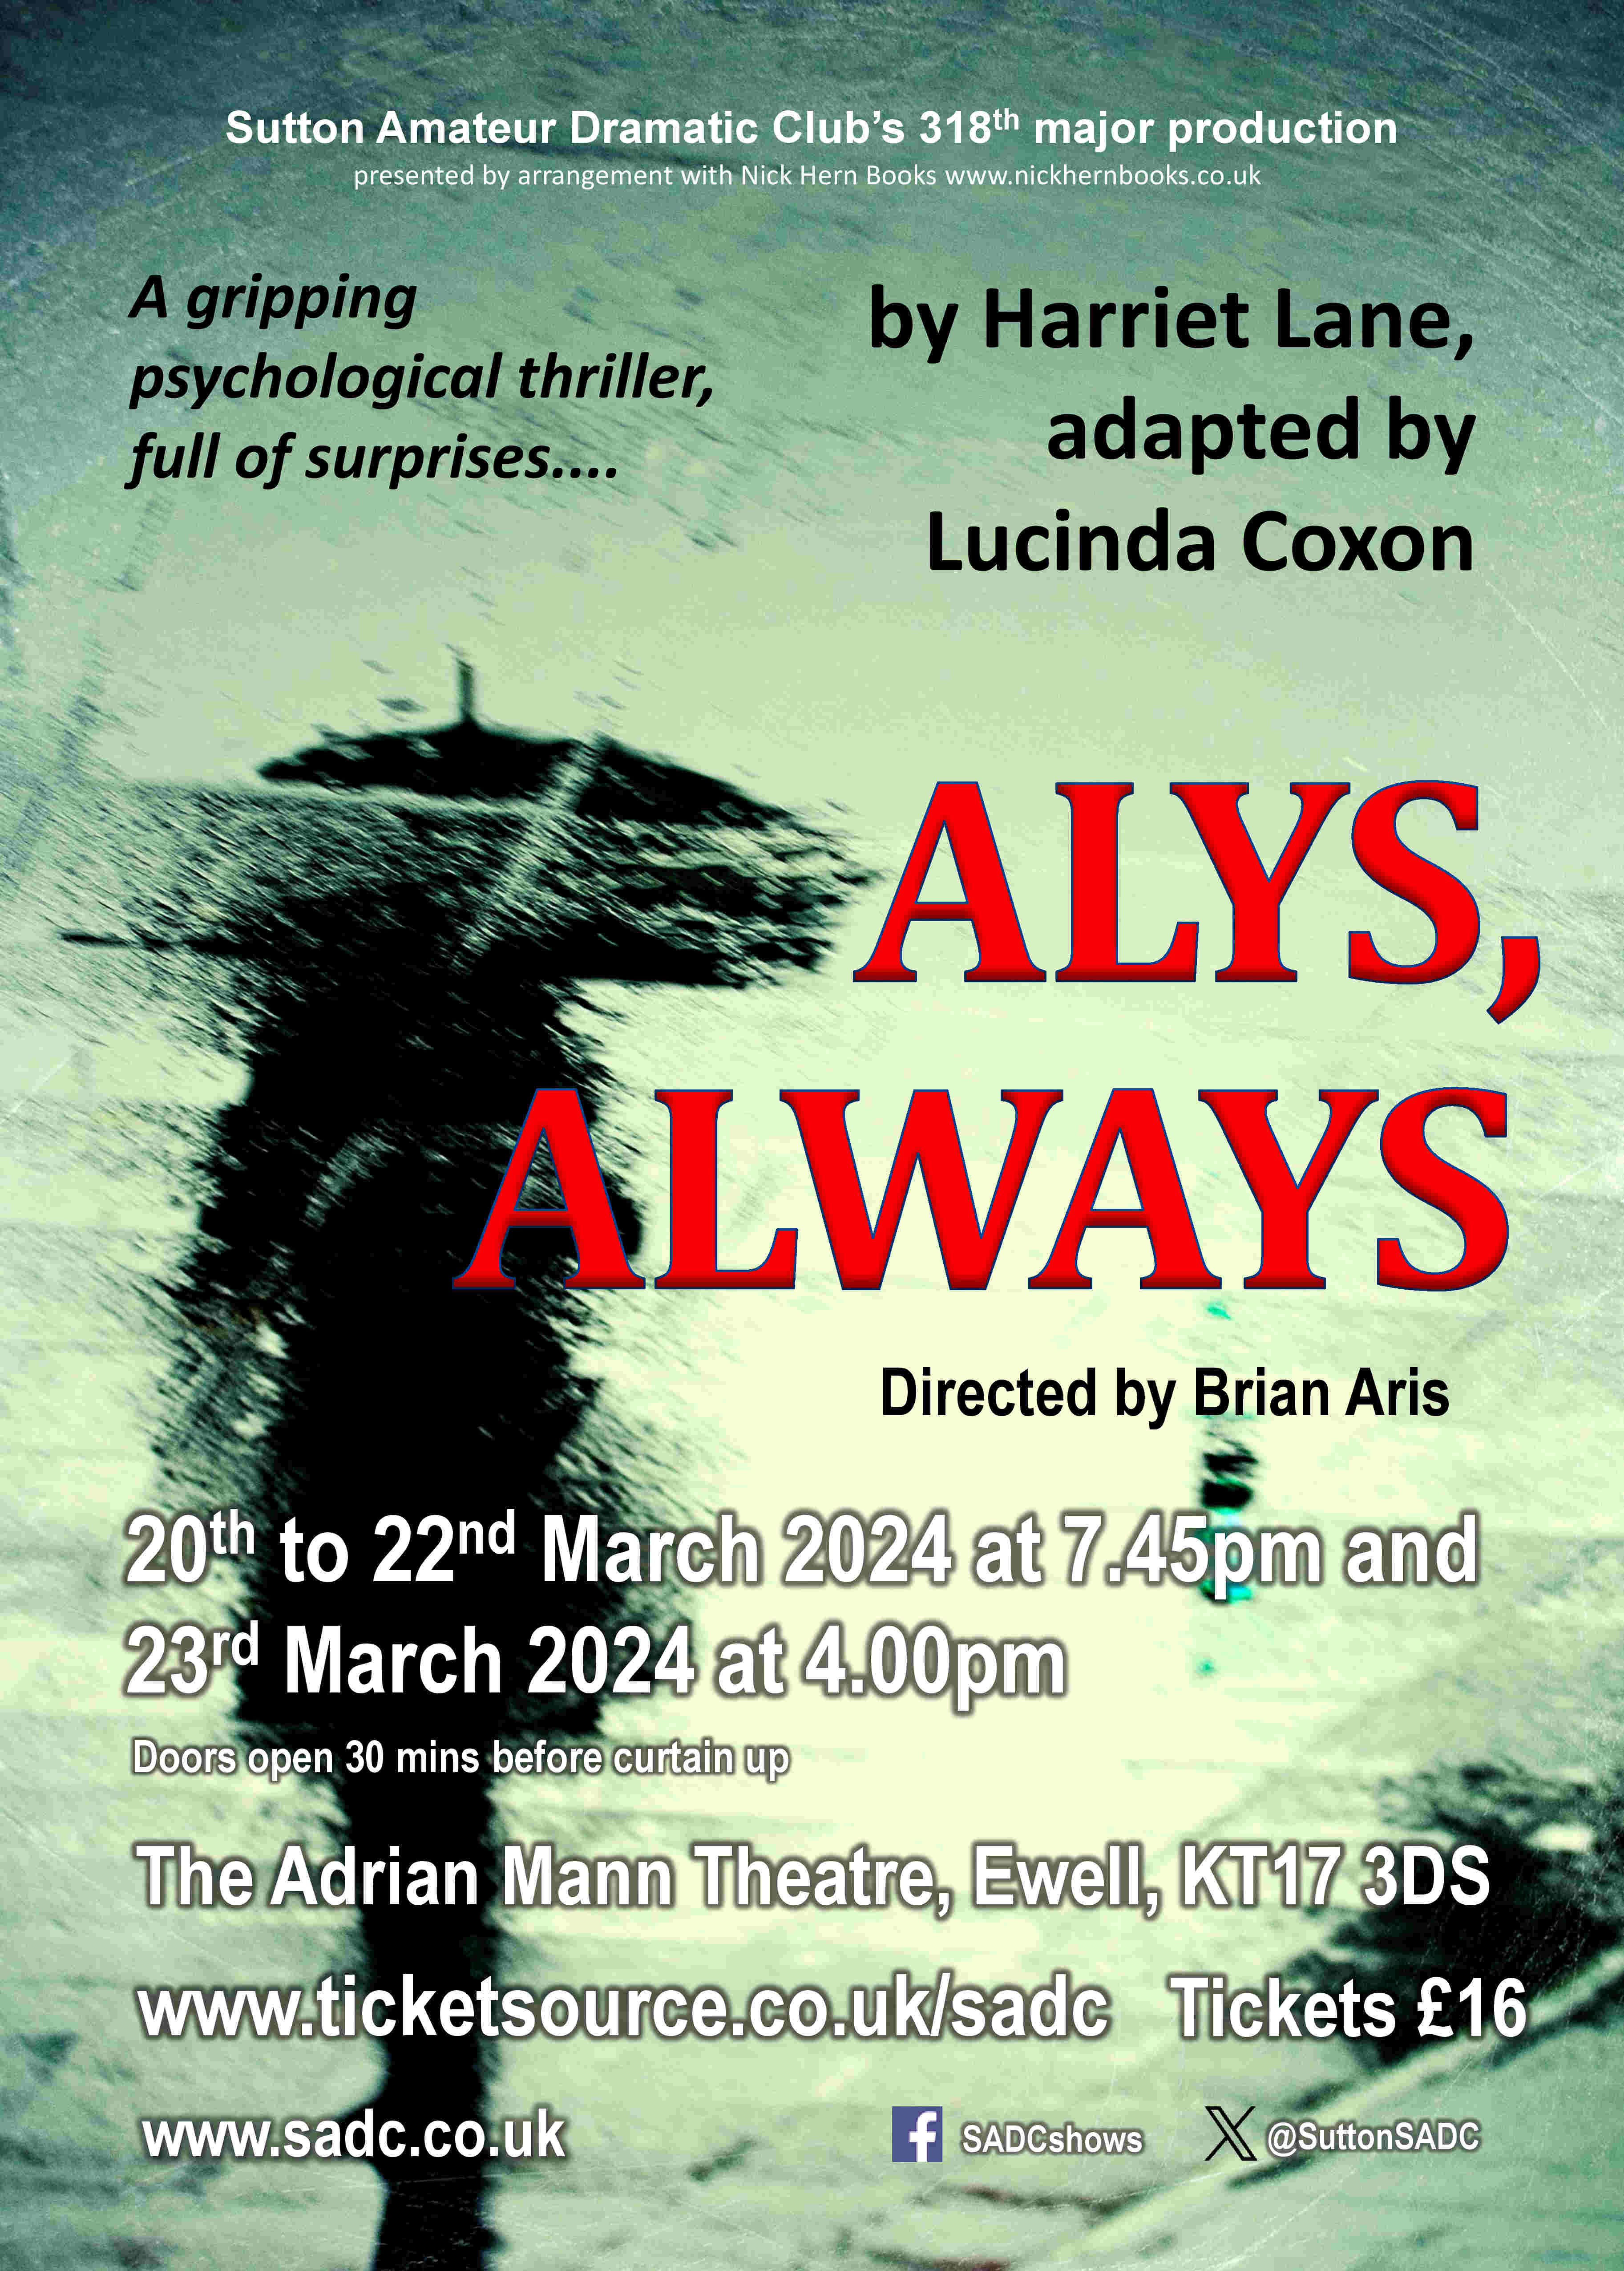 Alys, Always a play to be performed by SADC